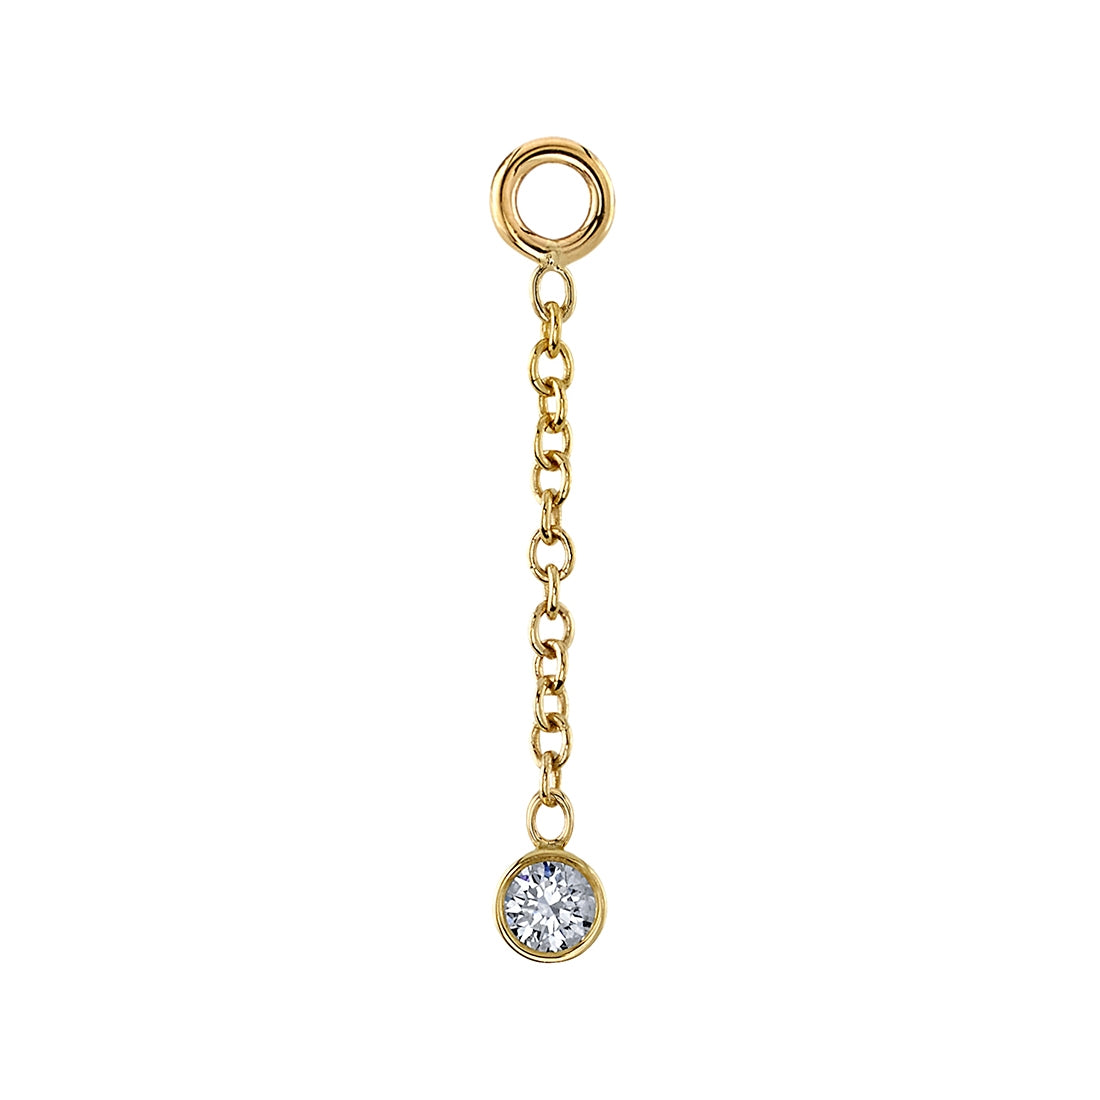 BVLA's "Tri Bead Cluster" in 14k Yellow gold